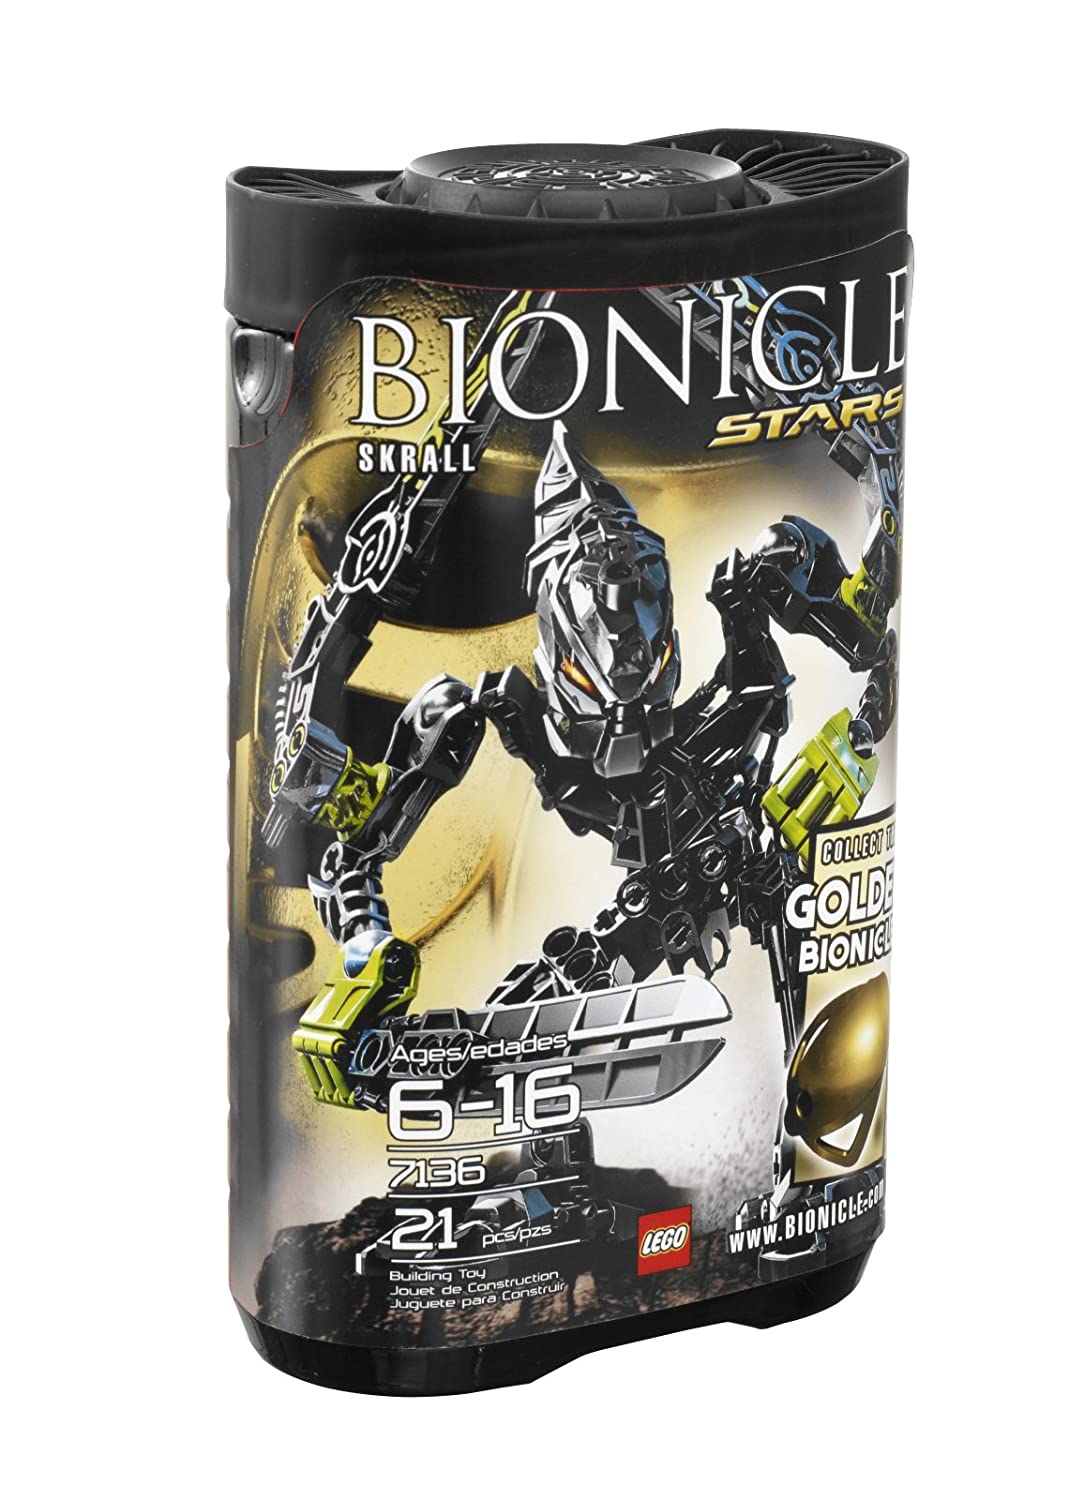 15 Best Lego BIONICLE Sets 2023 - Buying Guide & Reviews 11